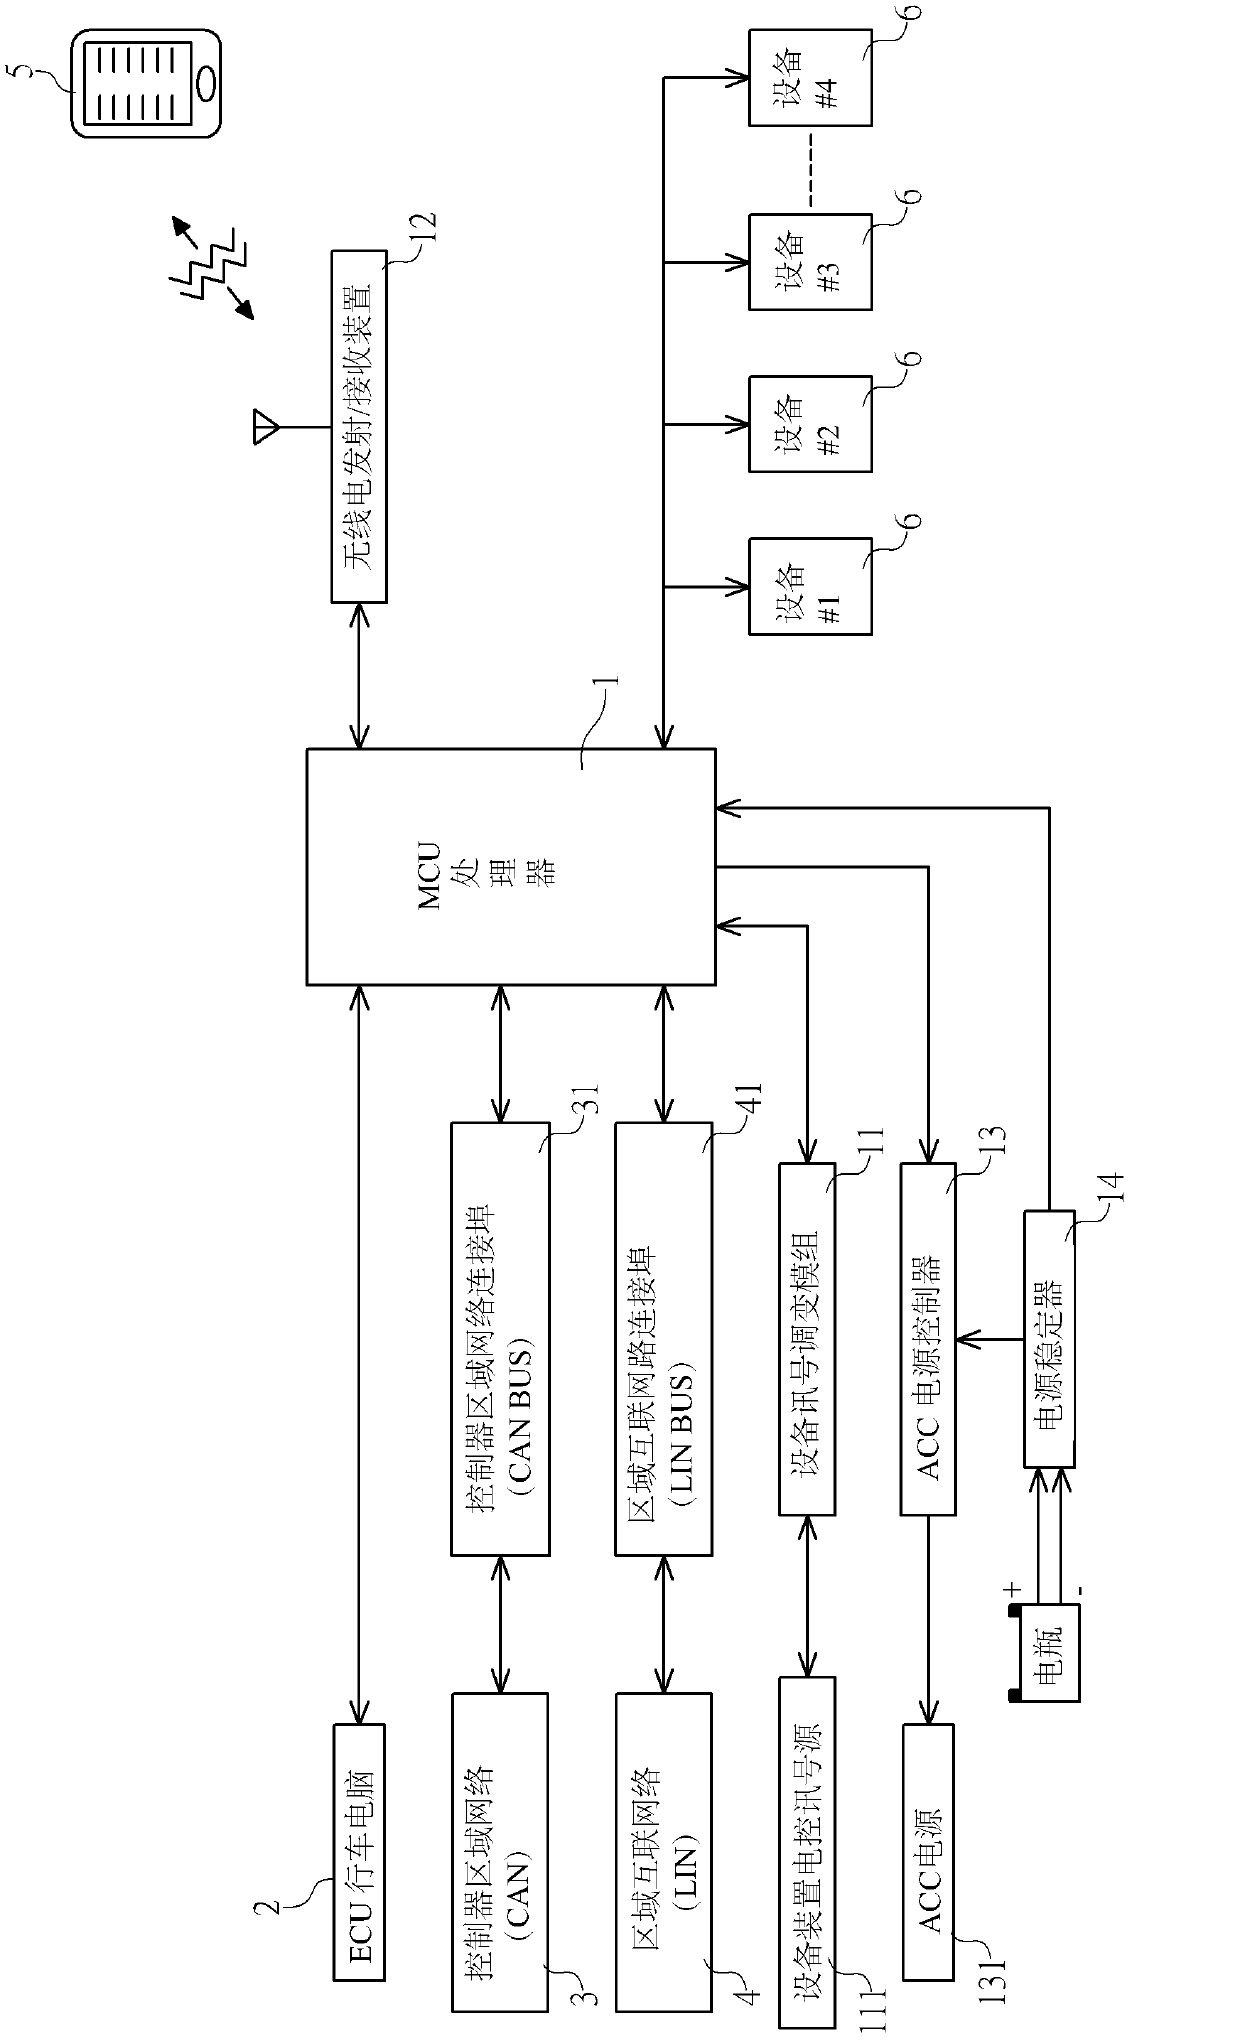 Driving information notification system